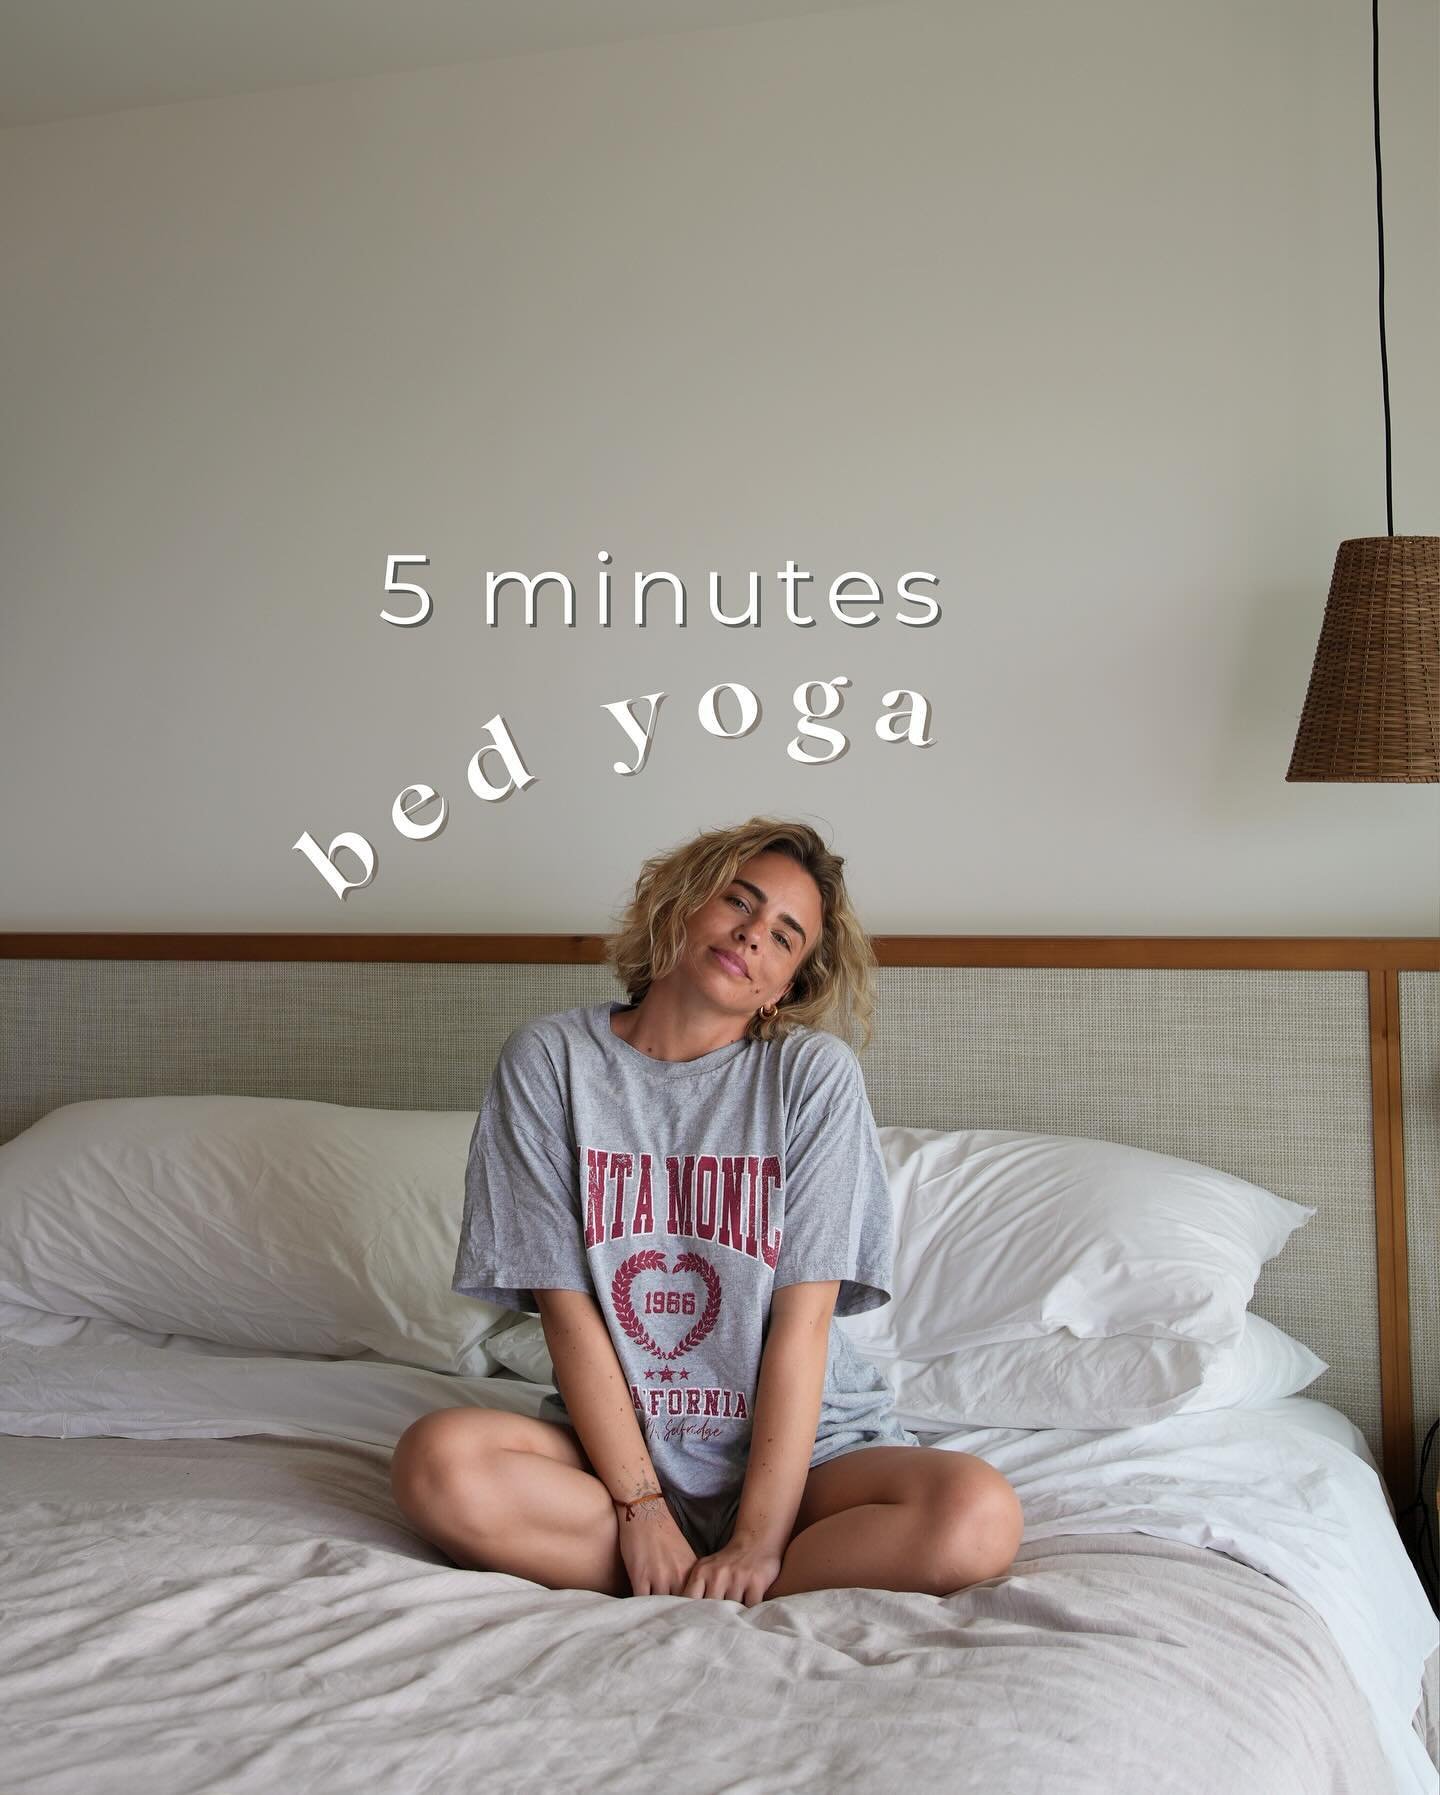 Save this rise &amp; shine routine for your mornings 🌞

No need to roll out your mat - you can flow through these gentle movements right from the comfort of your bed!

This quick routine will help ease any morning stiffness and prepare your body for